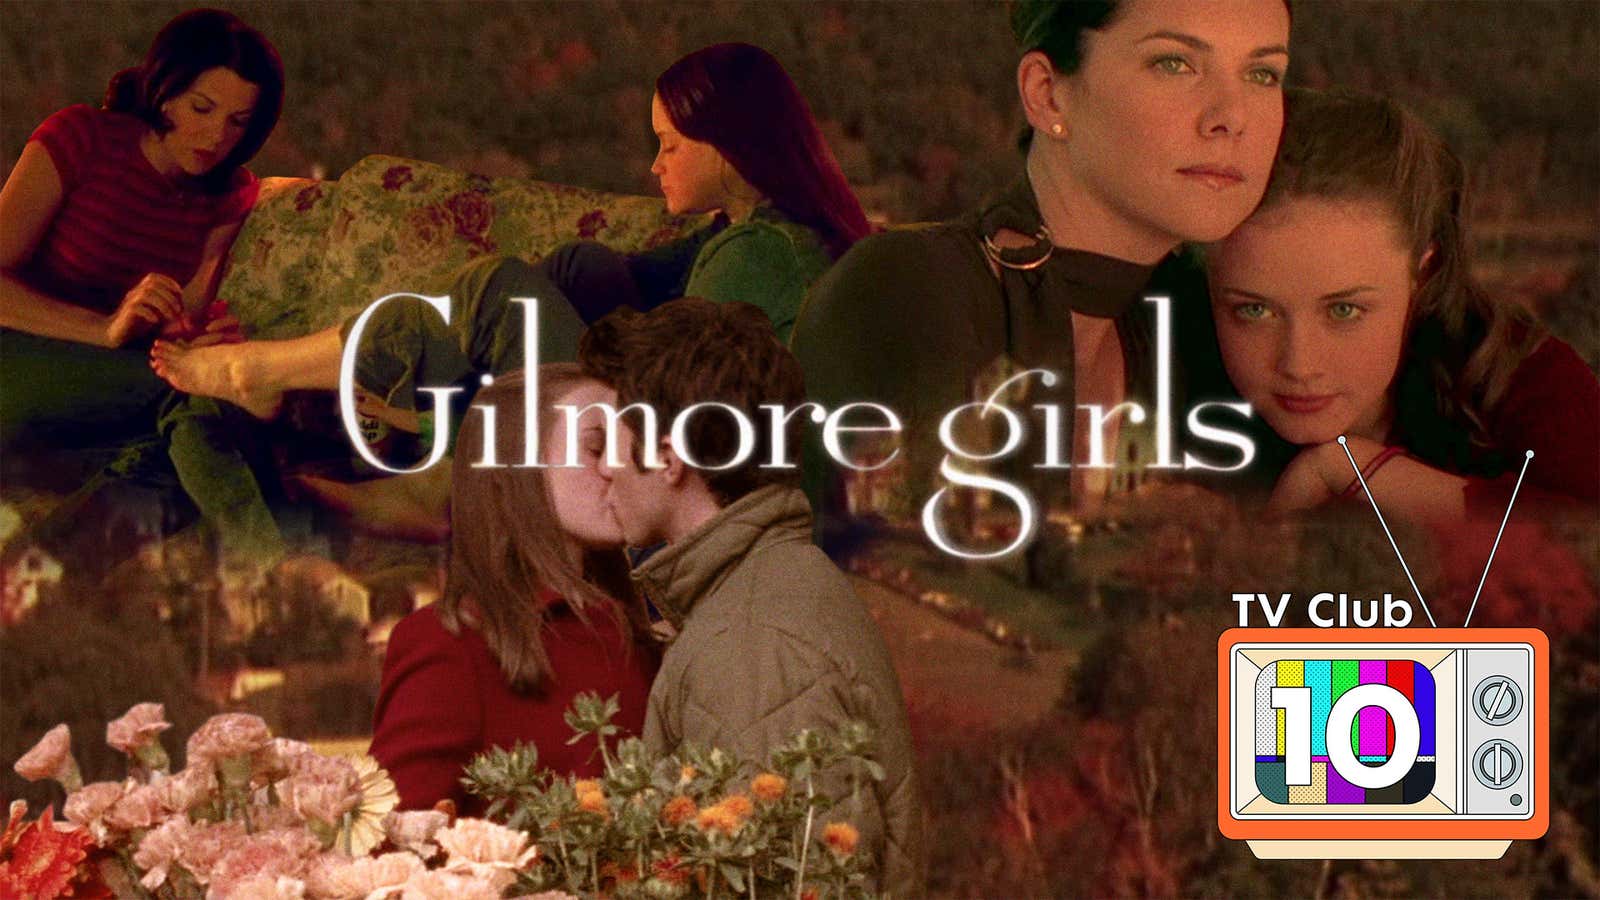 Where to Watch 'Gilmore Girls' and Take in All of the Stars Hollow Coziness